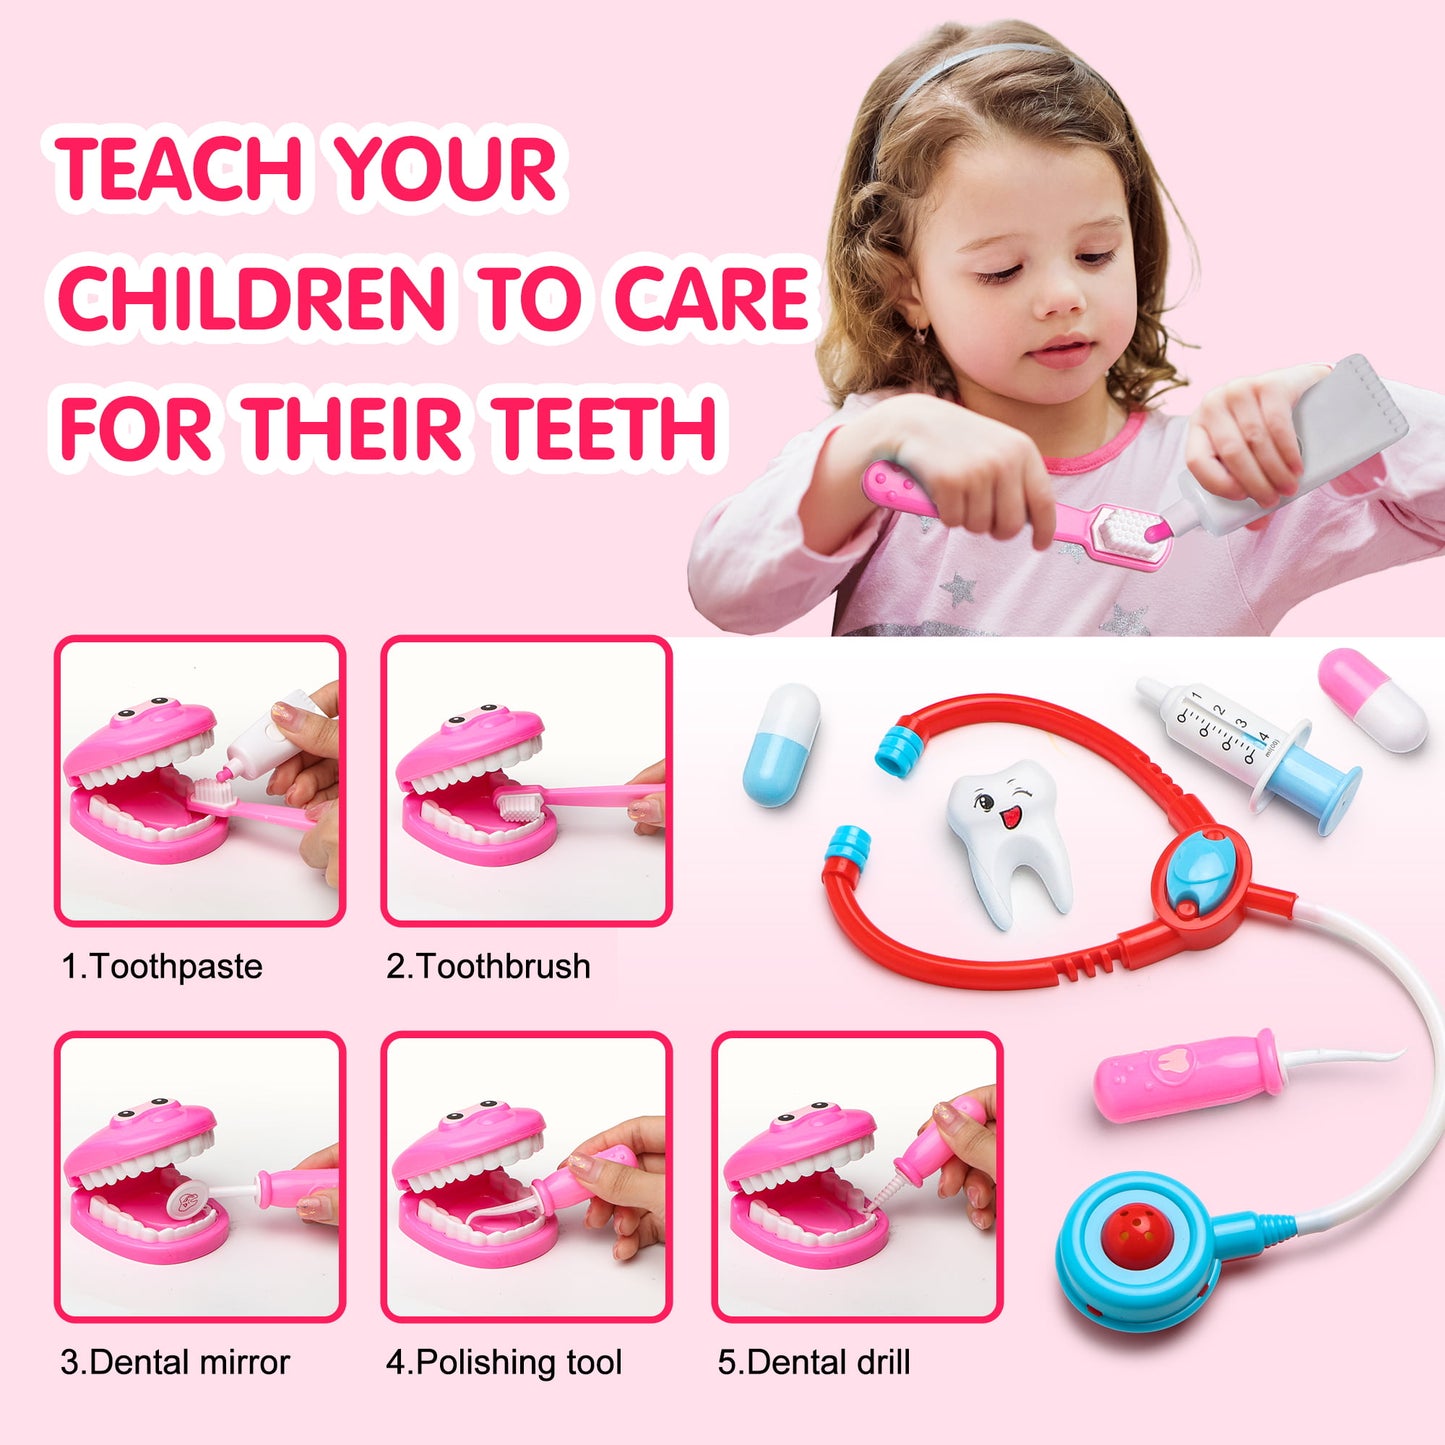 Dentist Kit for Kids, 26 Pieces Doctor Pretend Play Set, Educational Learning Toys for Students, Christmas / Birthday Gift Toys for Toddlers Girls Boys 3+